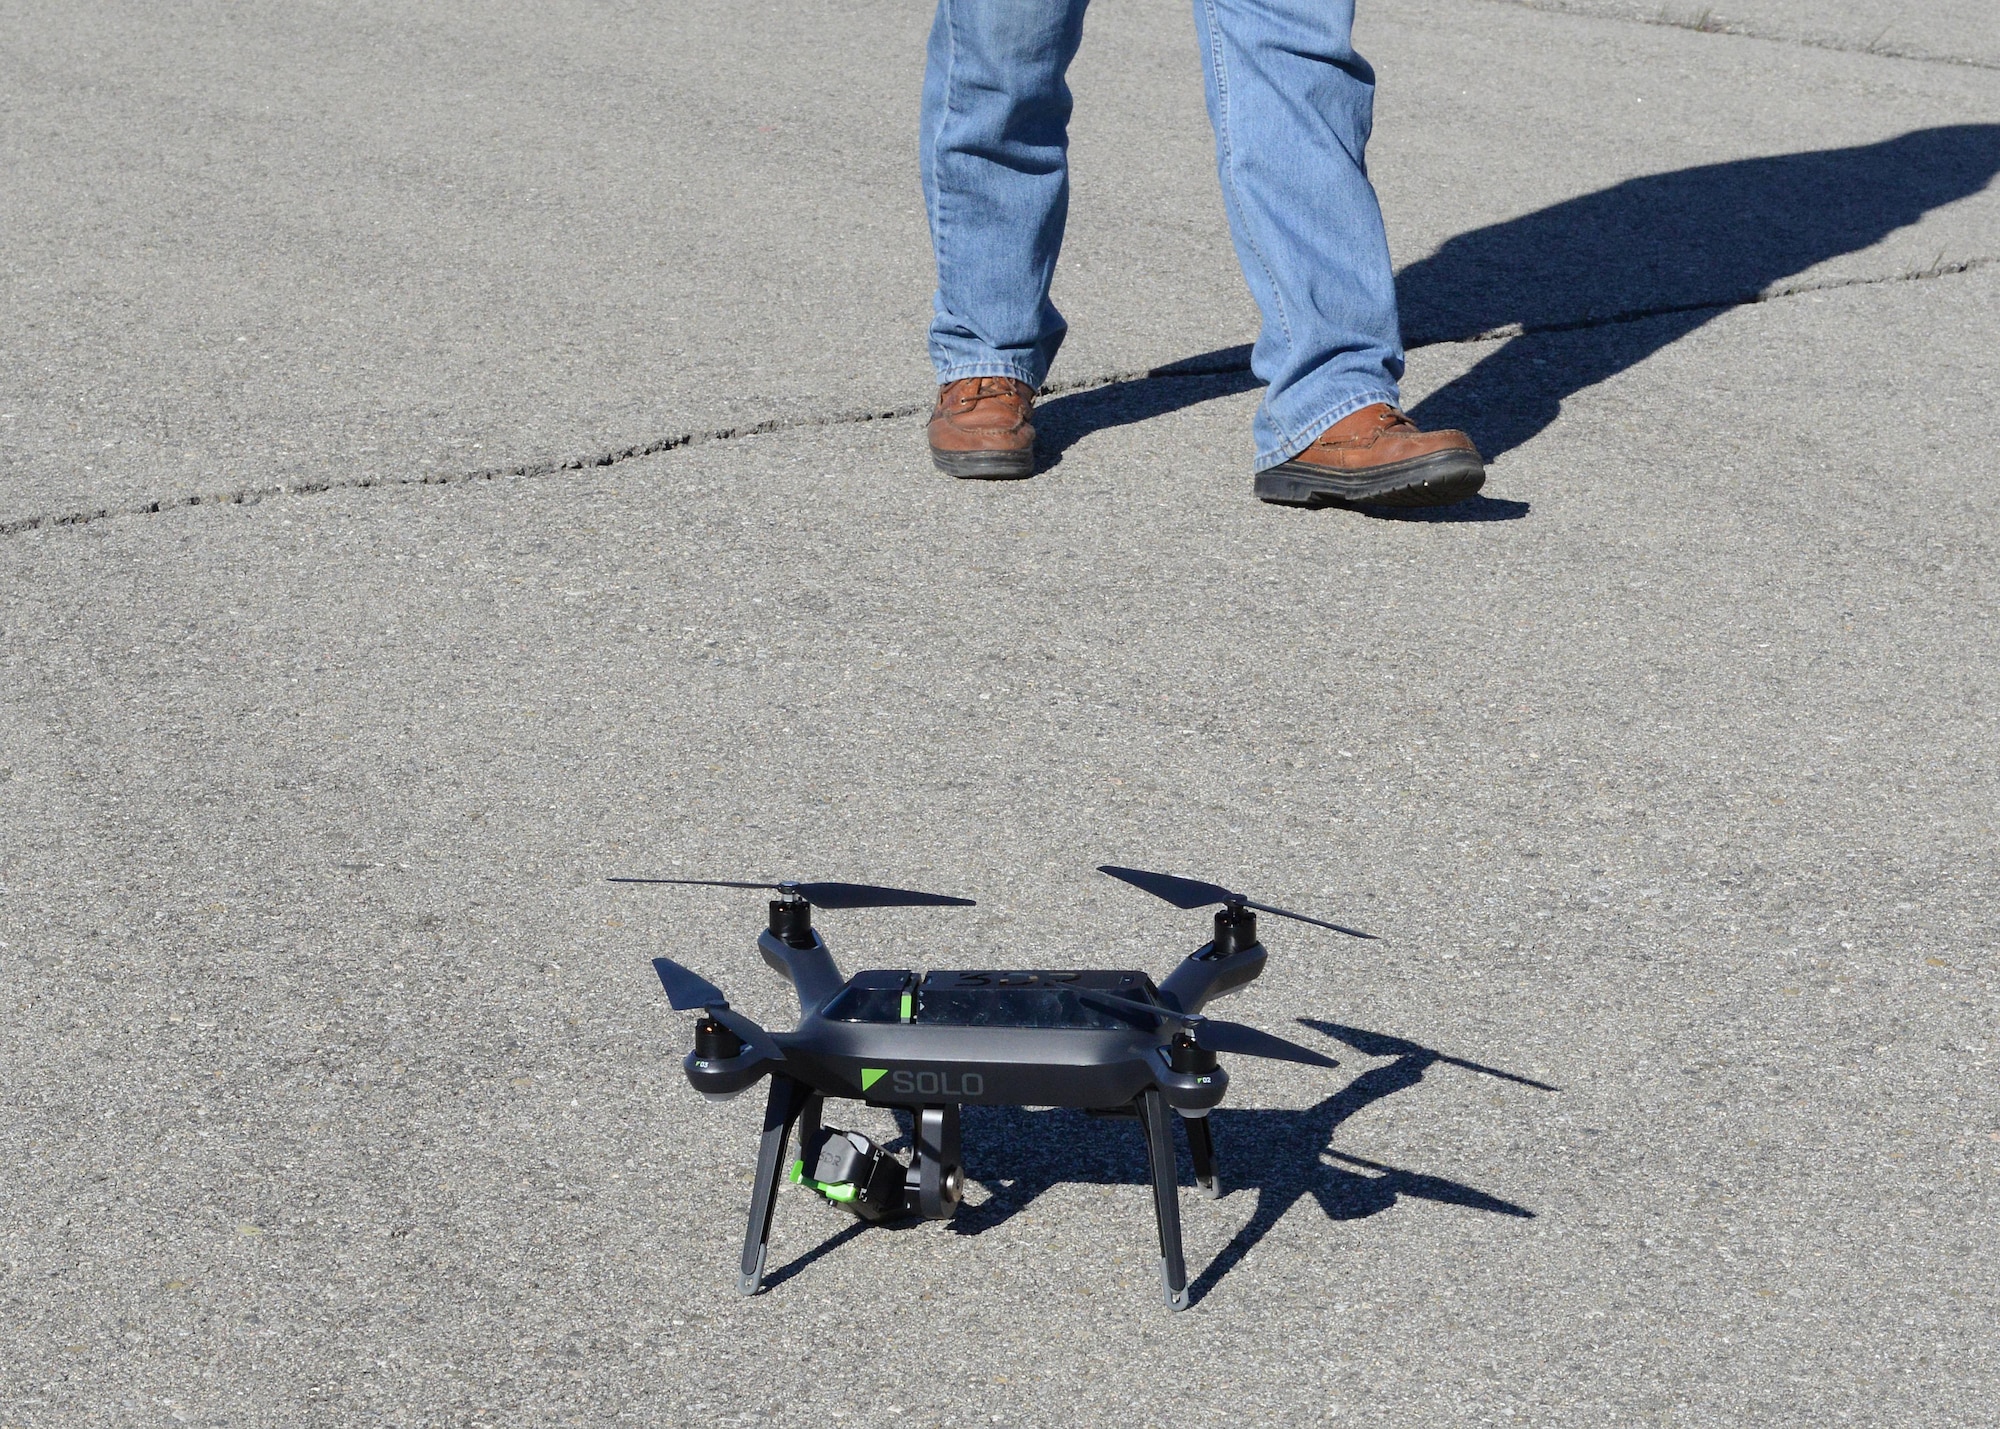 The quadcopter used for the test is available on the civilian market and is a relatively inexpensive test article according to Emerging Technologies Combined Test Force personnel. (U.S. Air Force photo by Kenji Thuloweit)